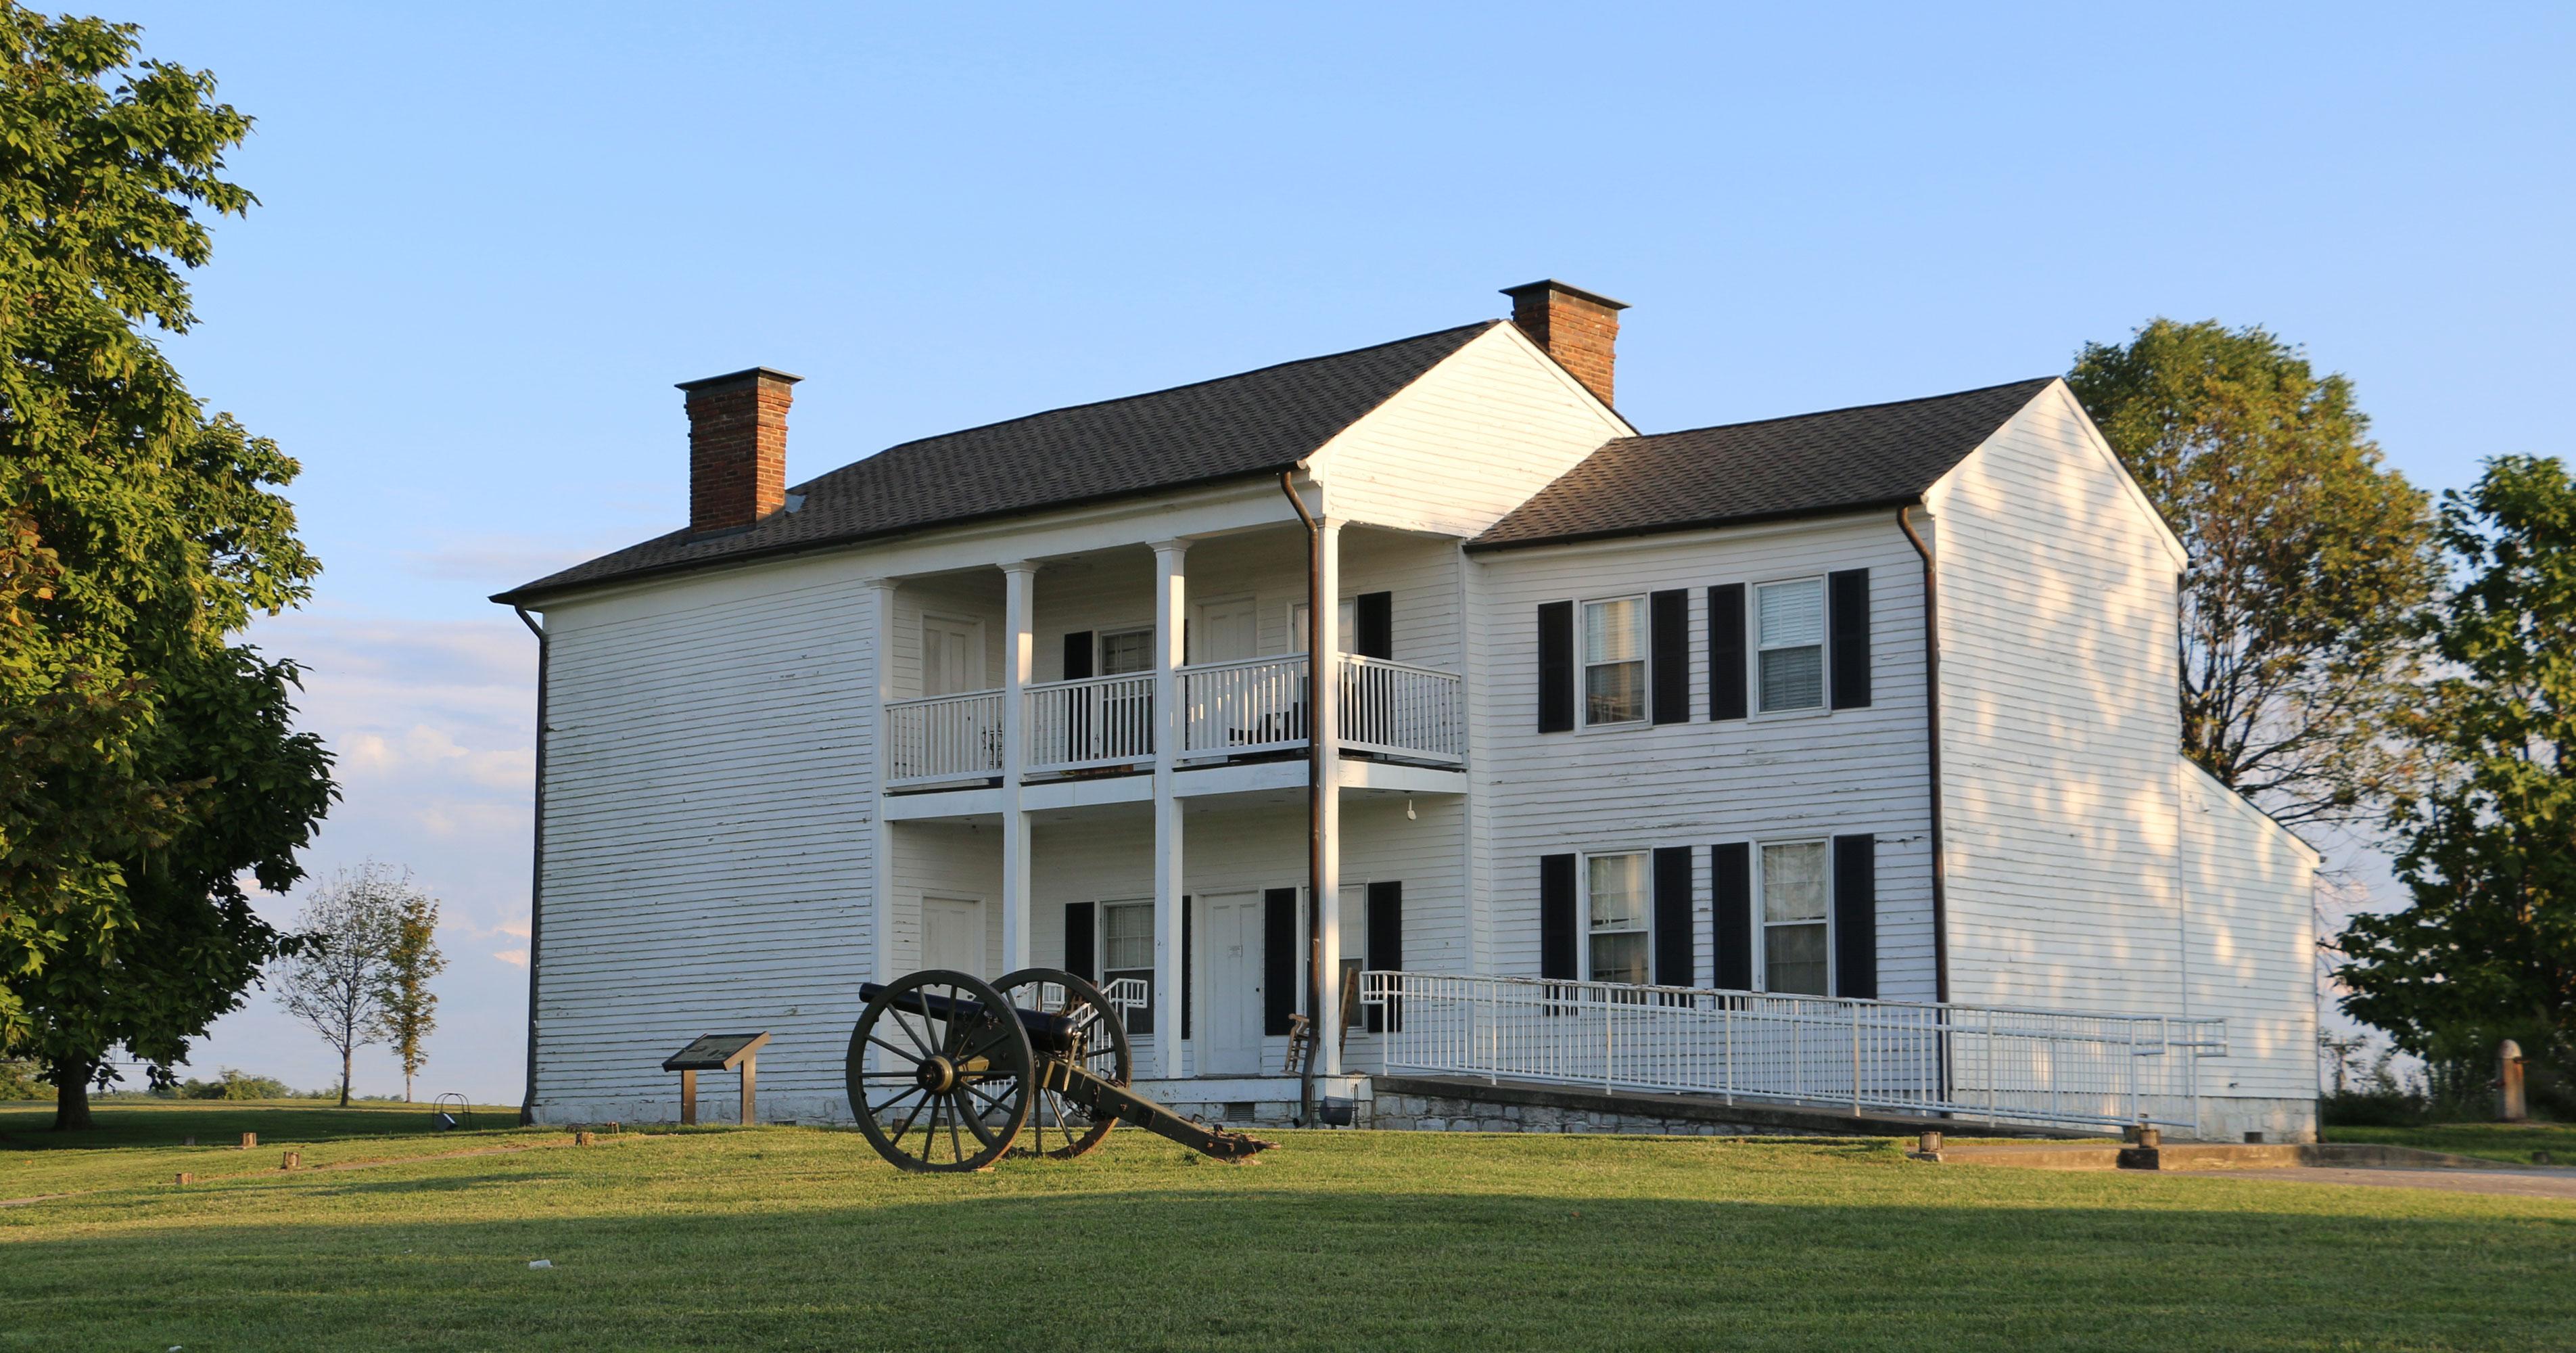 A white, 2 story farm house with a Civil War cannon sitting in front of it